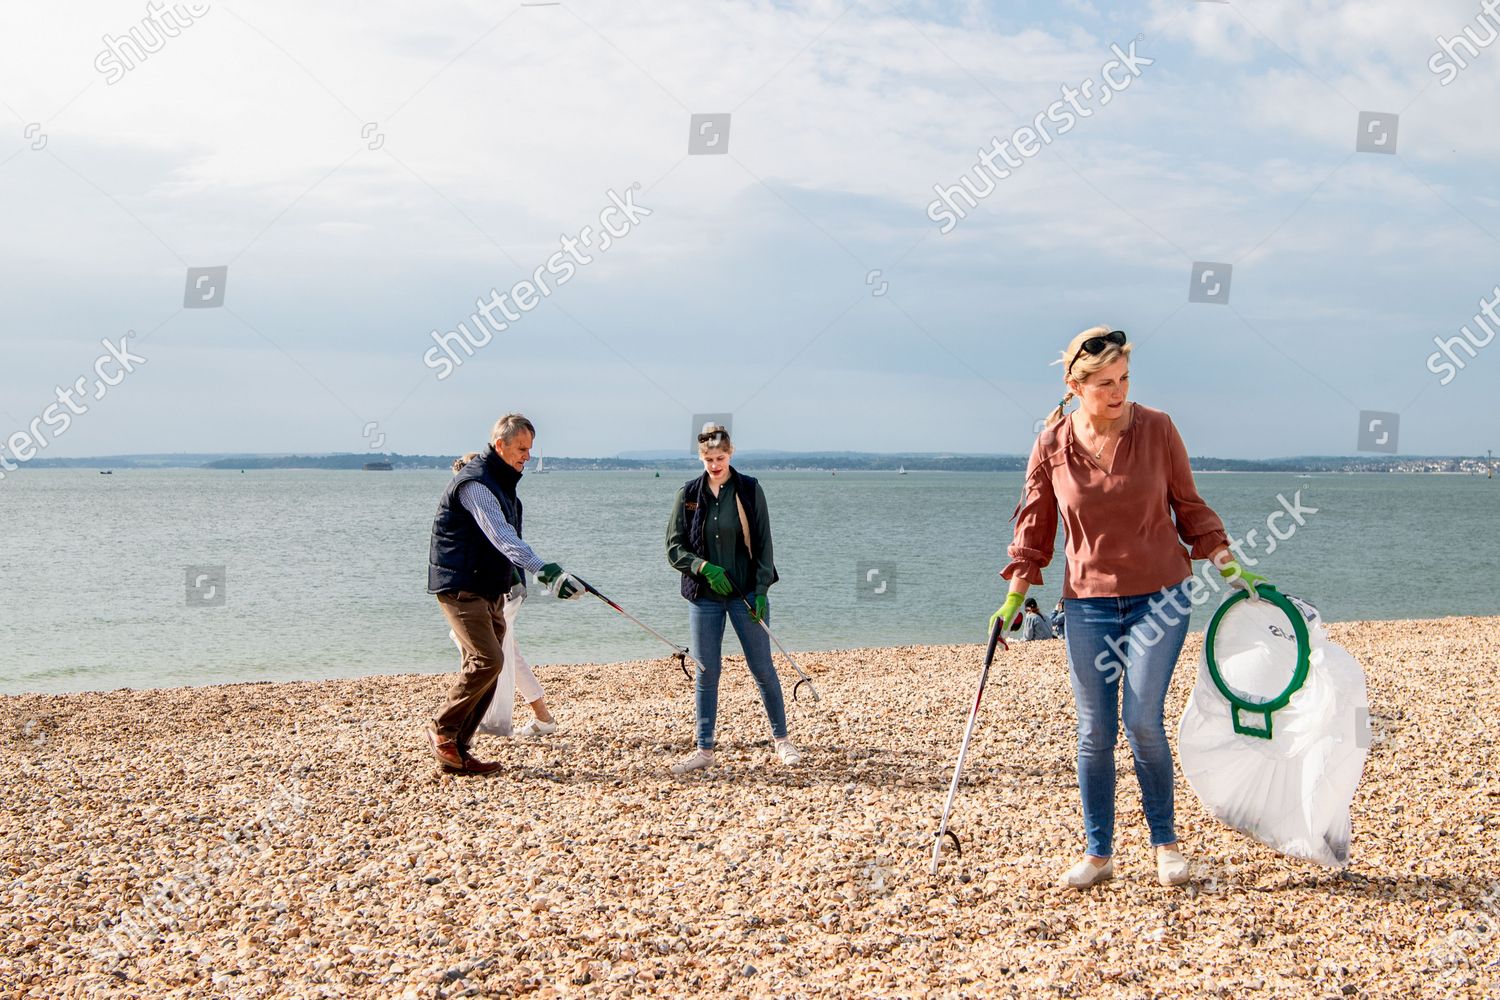 prince-edward-and-sophie-countess-of-wessex-great-british-beach-clean-southsea-beach-portsmouth-uk-shutterstock-editorial-10782998ct.jpg